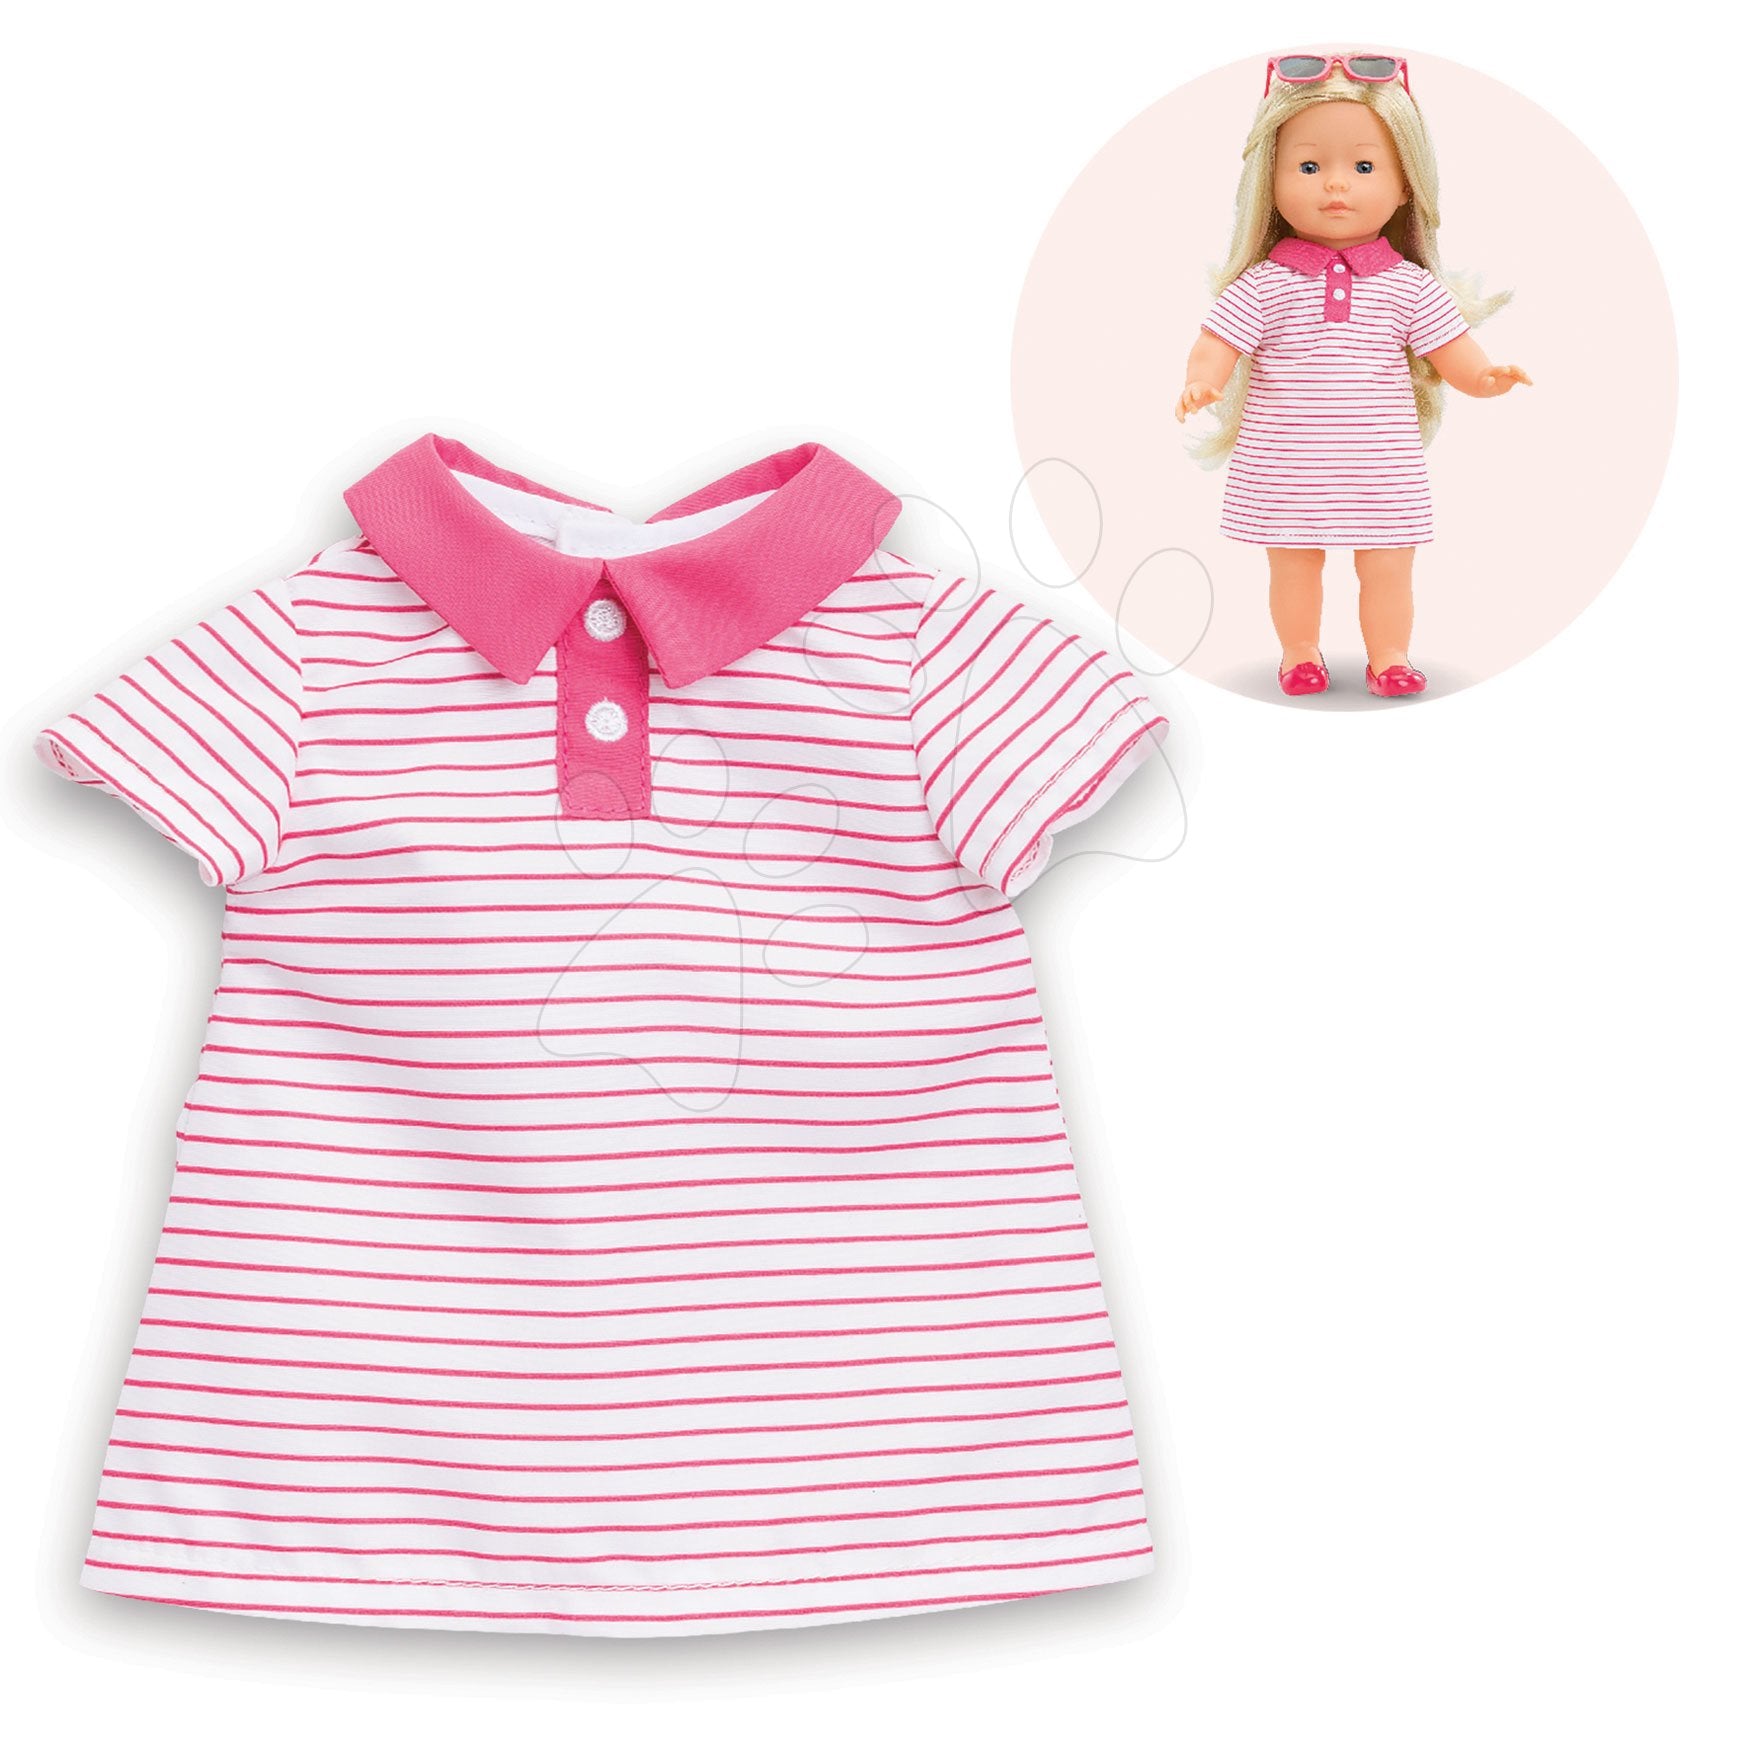 COROLLE MaCorolle - Clothing - Polo Dress Pink - 36cm